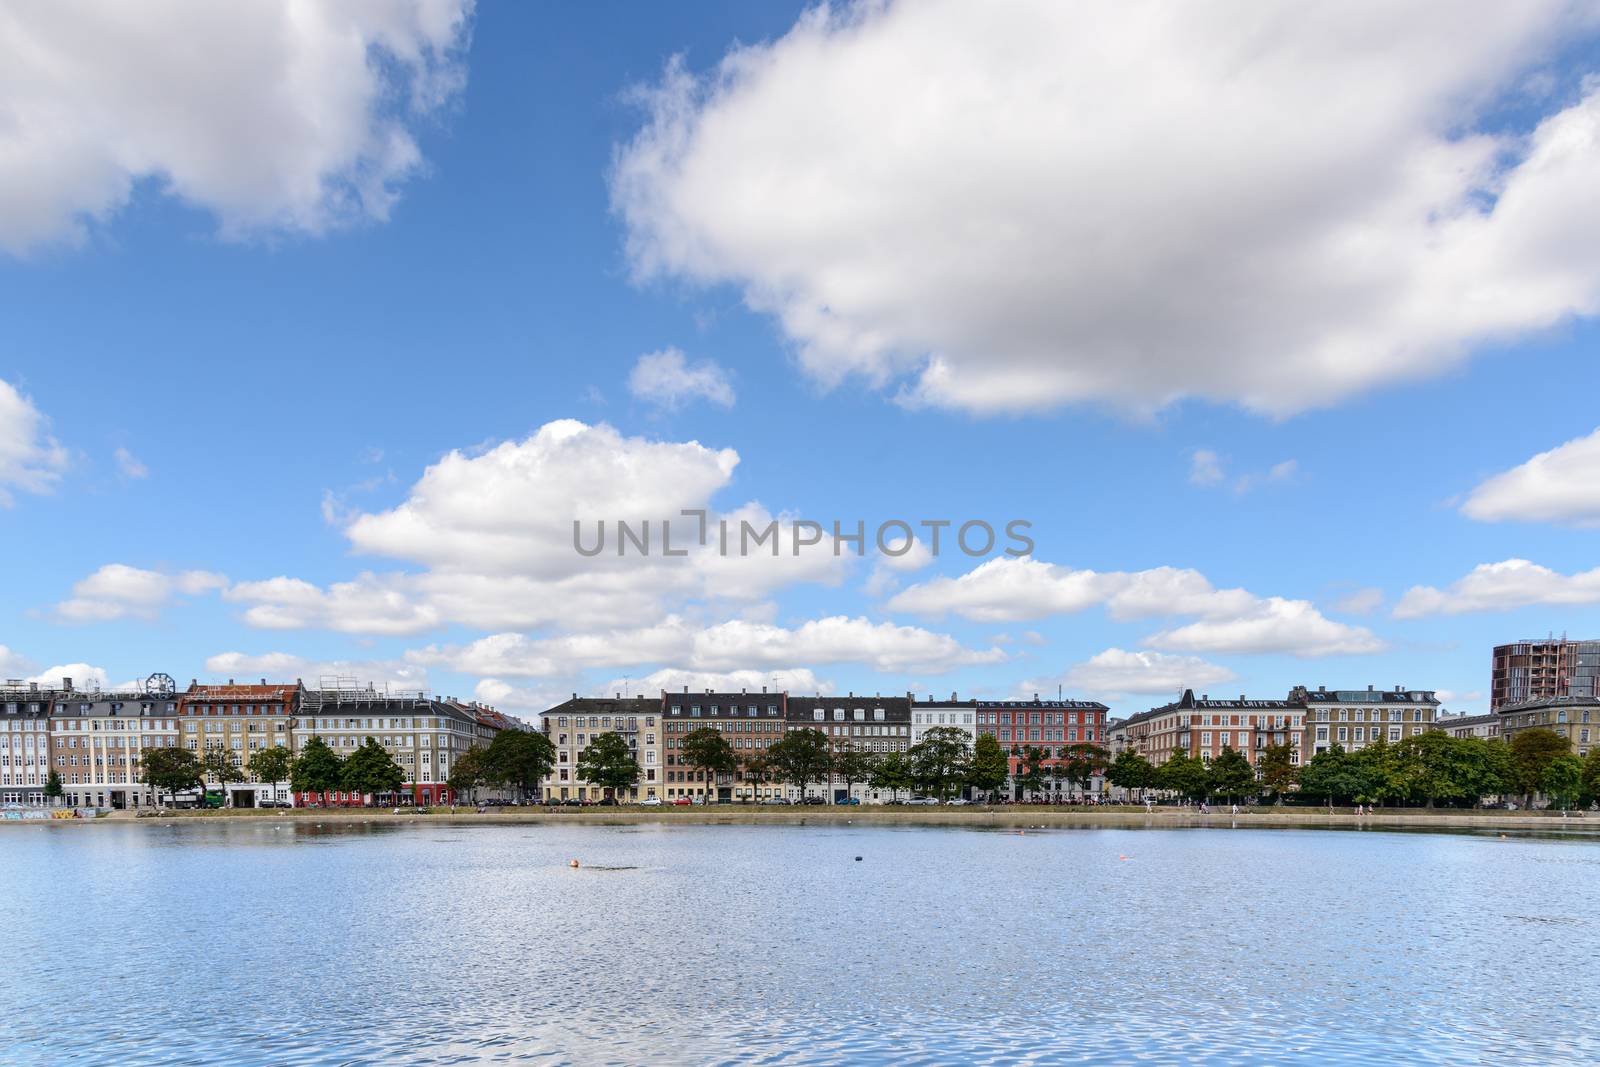 Copenhagen, Denmark - August 05, 2015 : the lakes in Copenhagen, Denmark is a row of 3 rectangular lakes curving around the western margin of the City centre, forming one the oldest and most distinctive features of the city's topography. The paths around them are popular with strollers and runners. Copenhagen, Denmark.